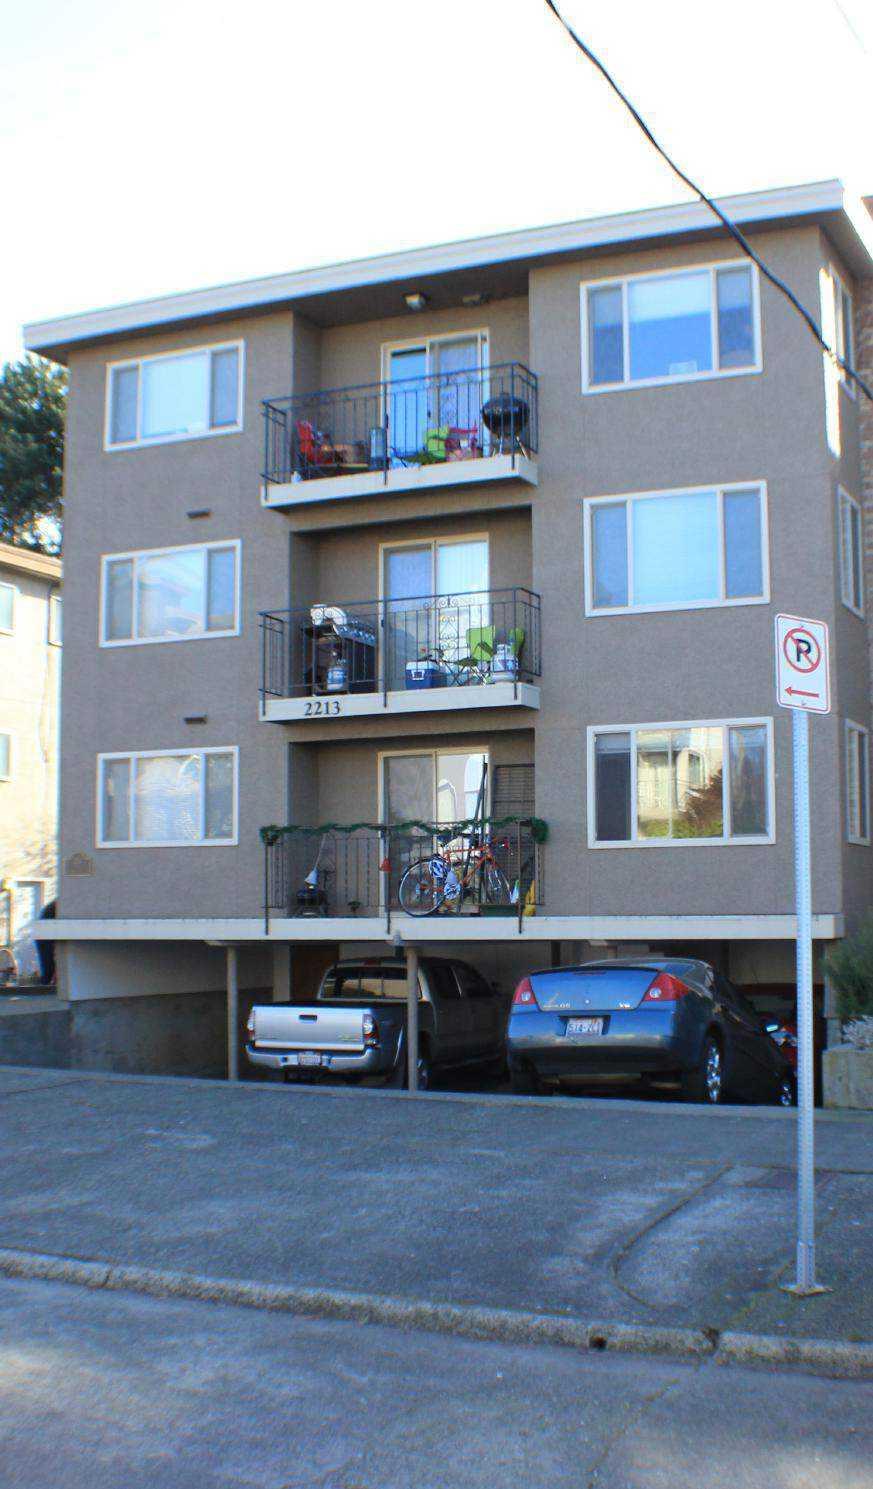 FINANCIAL OFFERING PROPERTY OVERVIEW Number of Units 7 Year Constructed 1967 Rentable SF 6,085 Lot Size 5,000 # of UNITS UNIT TYPE AVG SIZE CURRENT PSF PRO FORMA PSF B2 2 Bedroom 1 Bath 700 $1,795 $2.